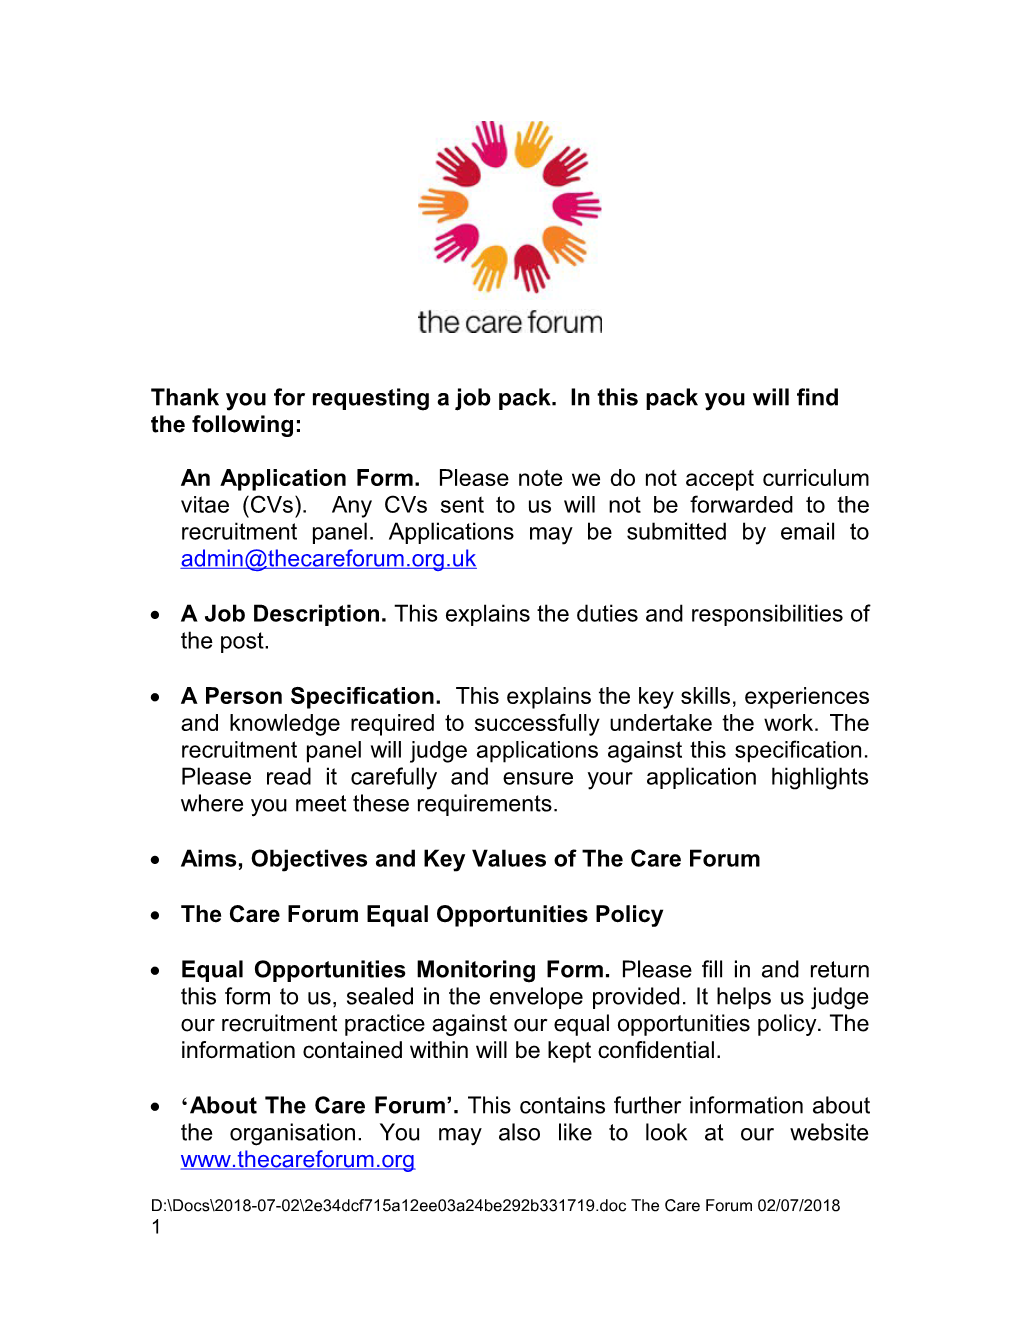 The Care Forum